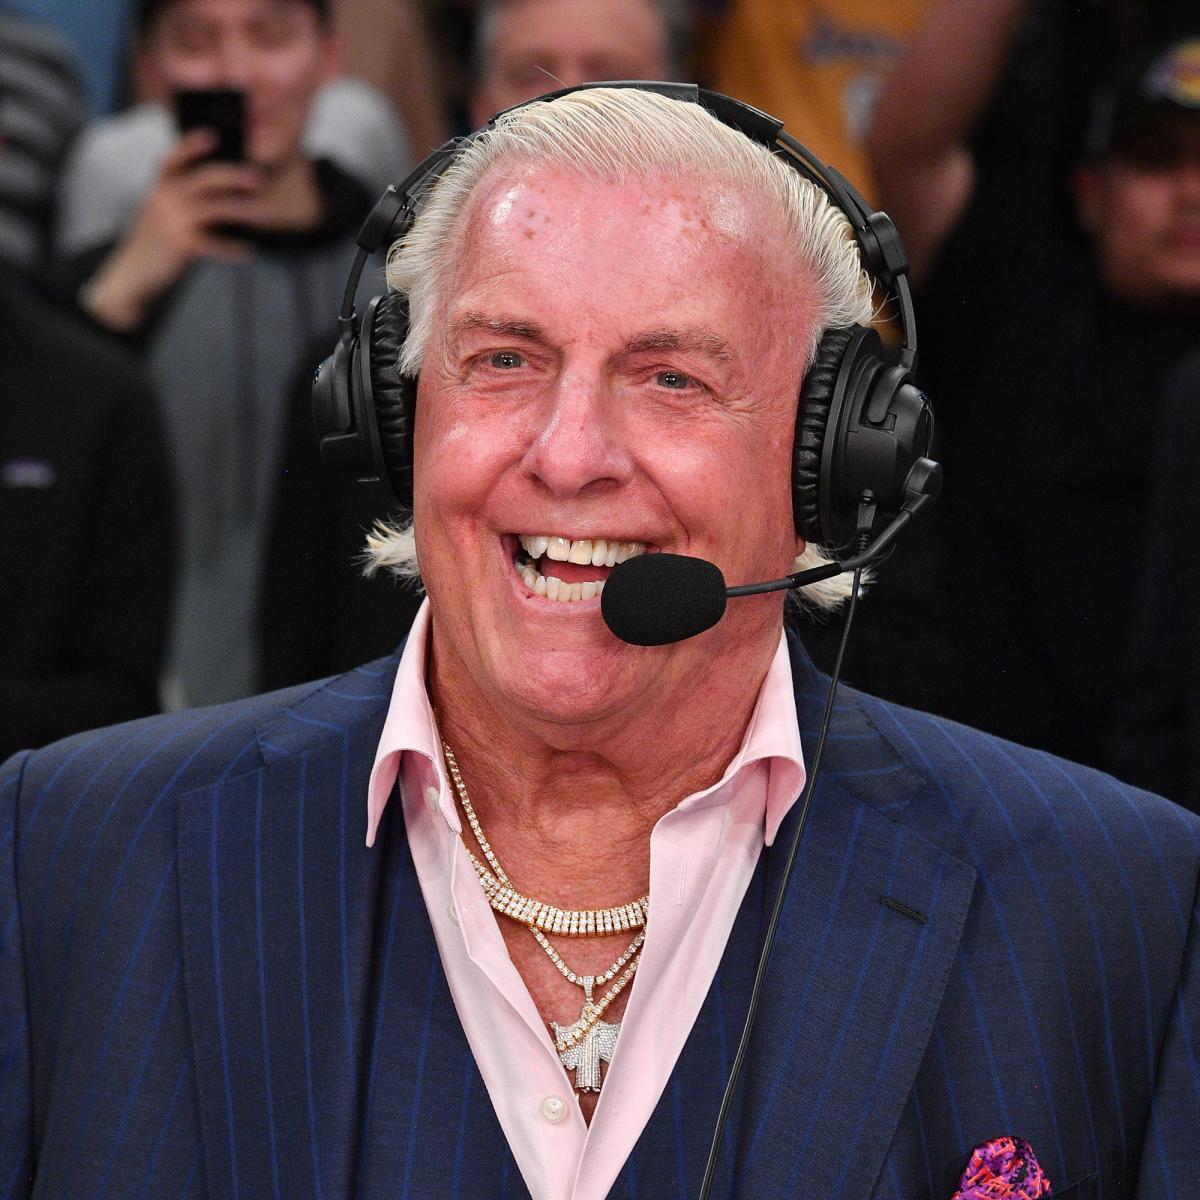 Ric Flair Announces New WWE Contract in Twitter Photo | News, Scores ...